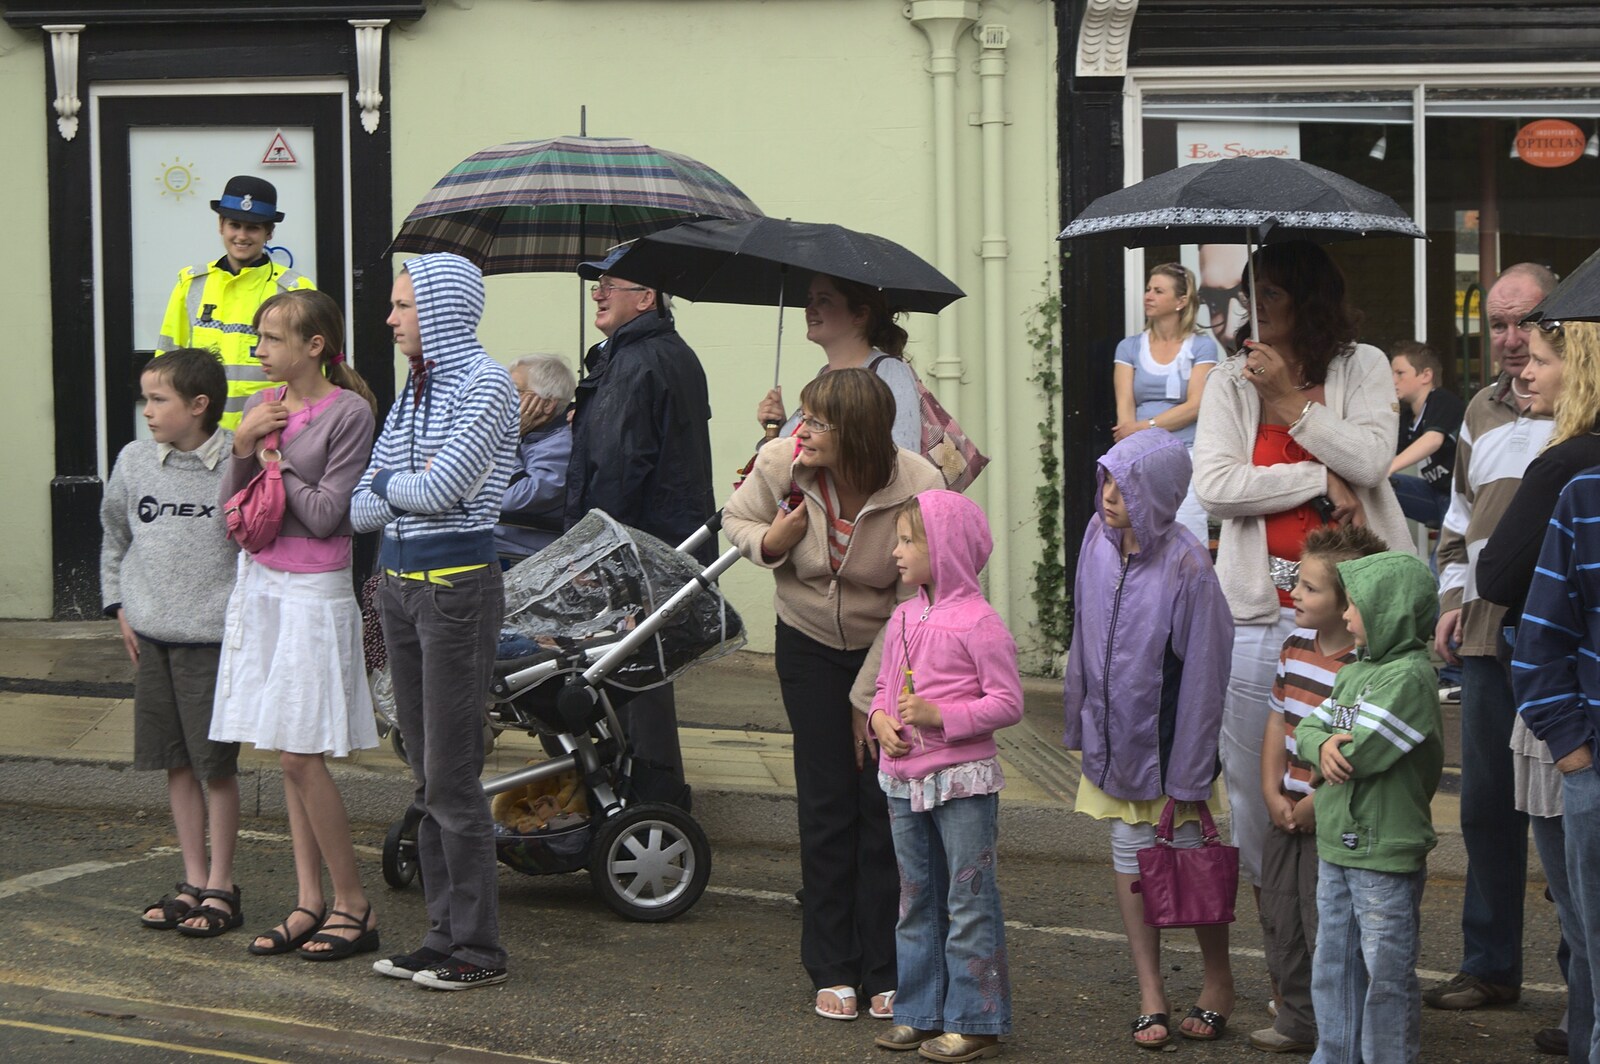 Isobel under an umbrella from Diss Carnival Procession, Diss, Norfolk - 21st June 2009